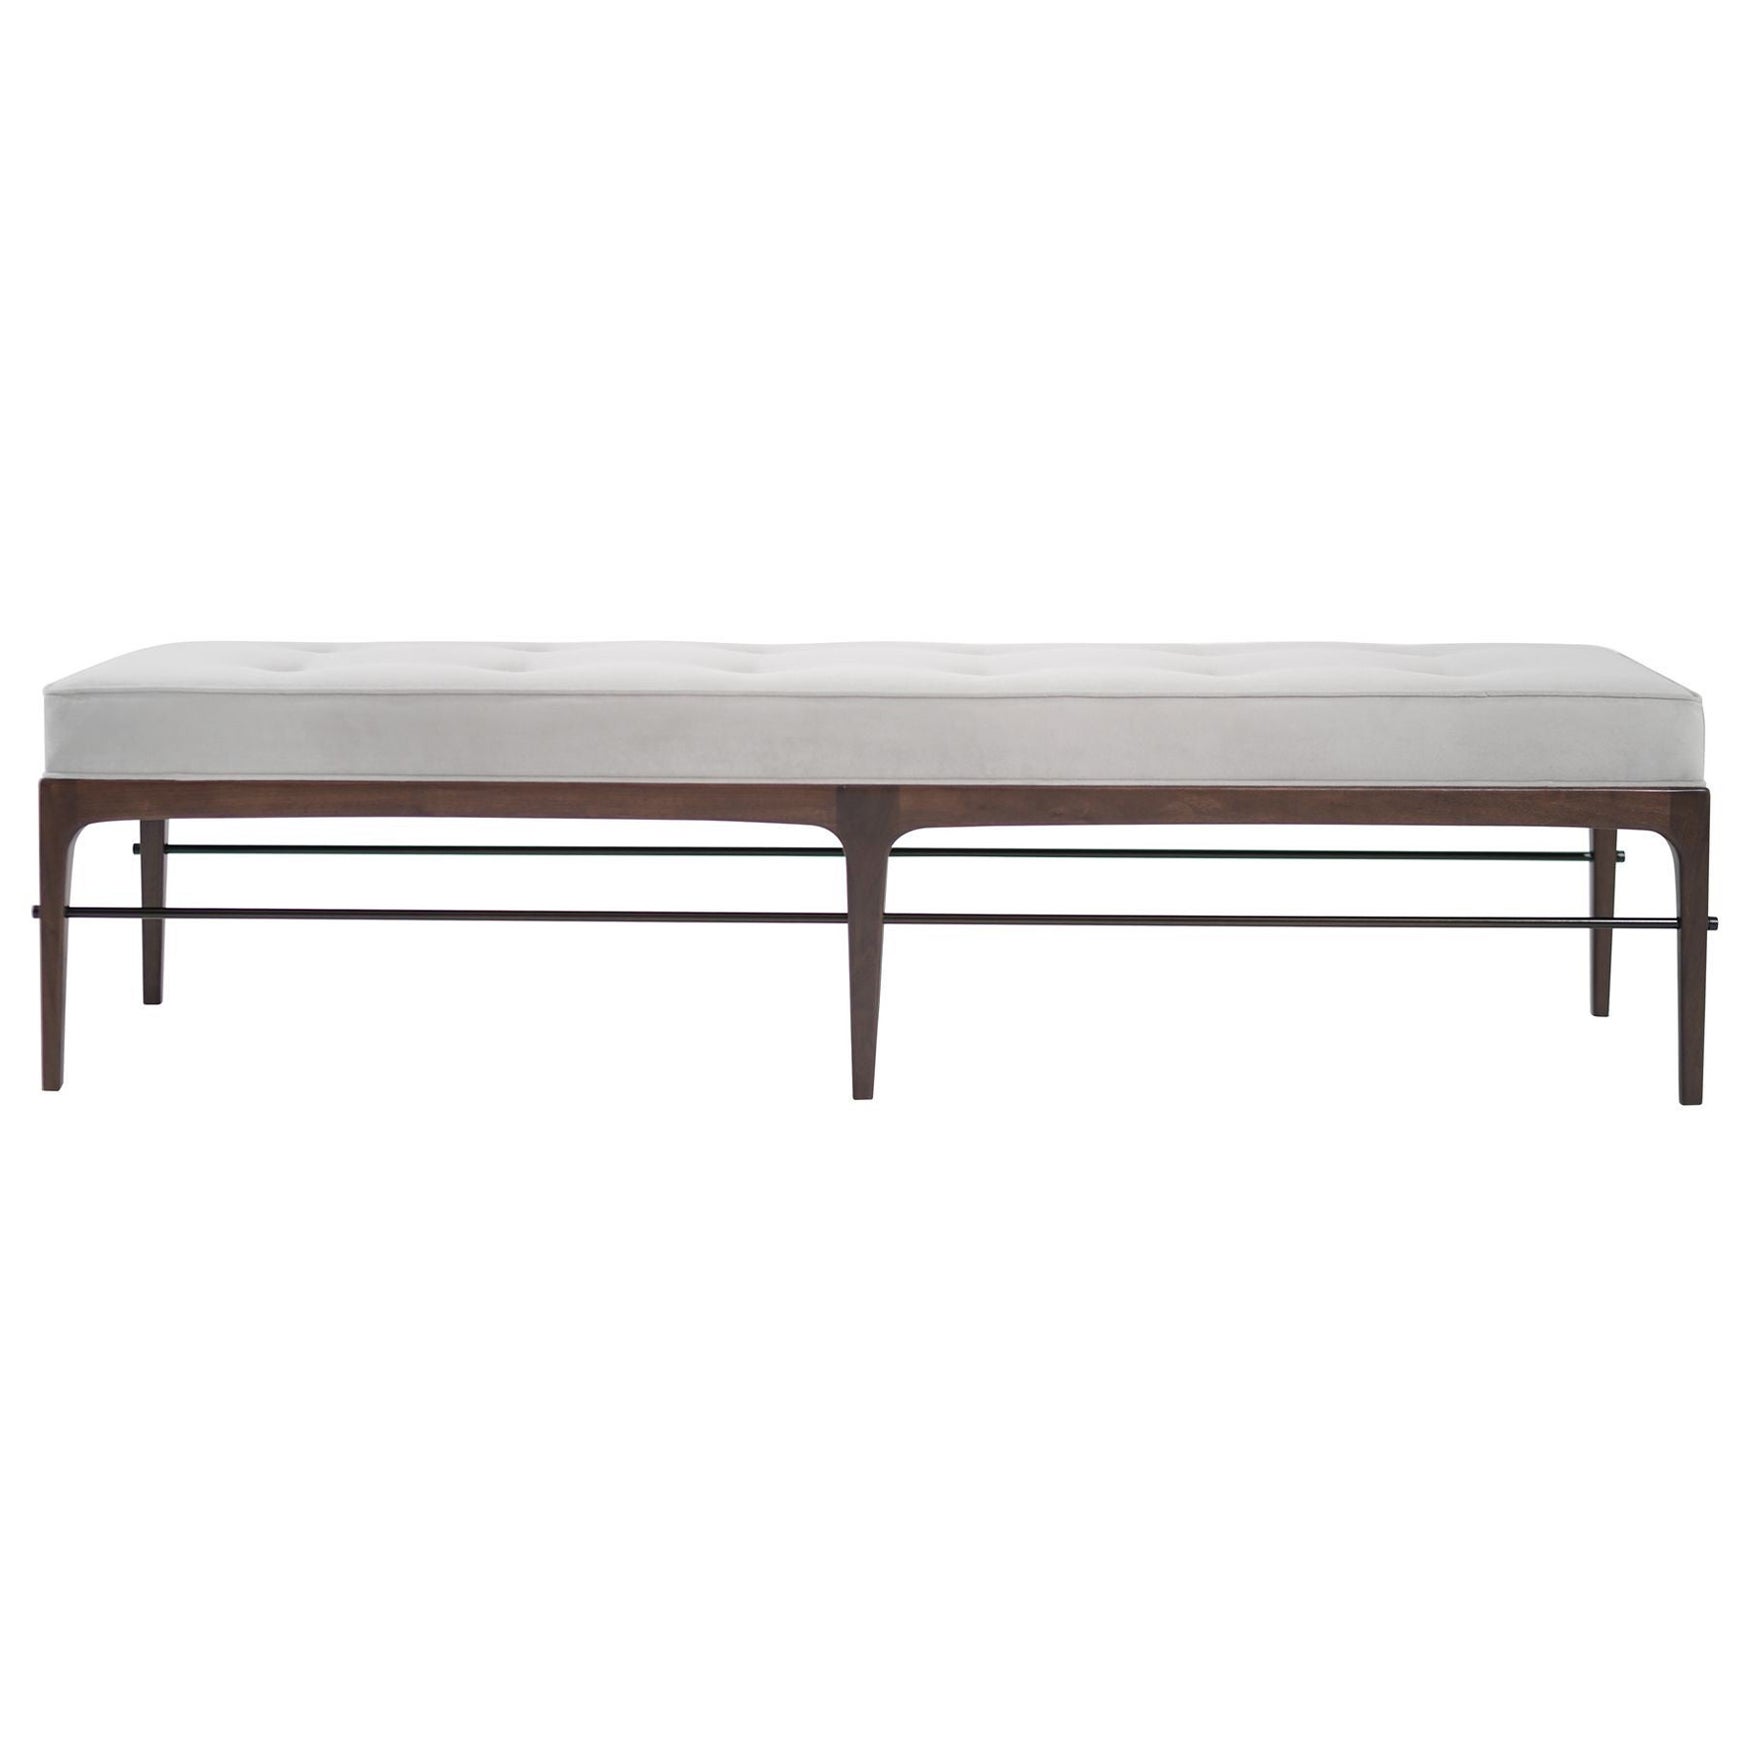 Linear Bench in Natural Wanut Series 72 by Stamford Modern For Sale